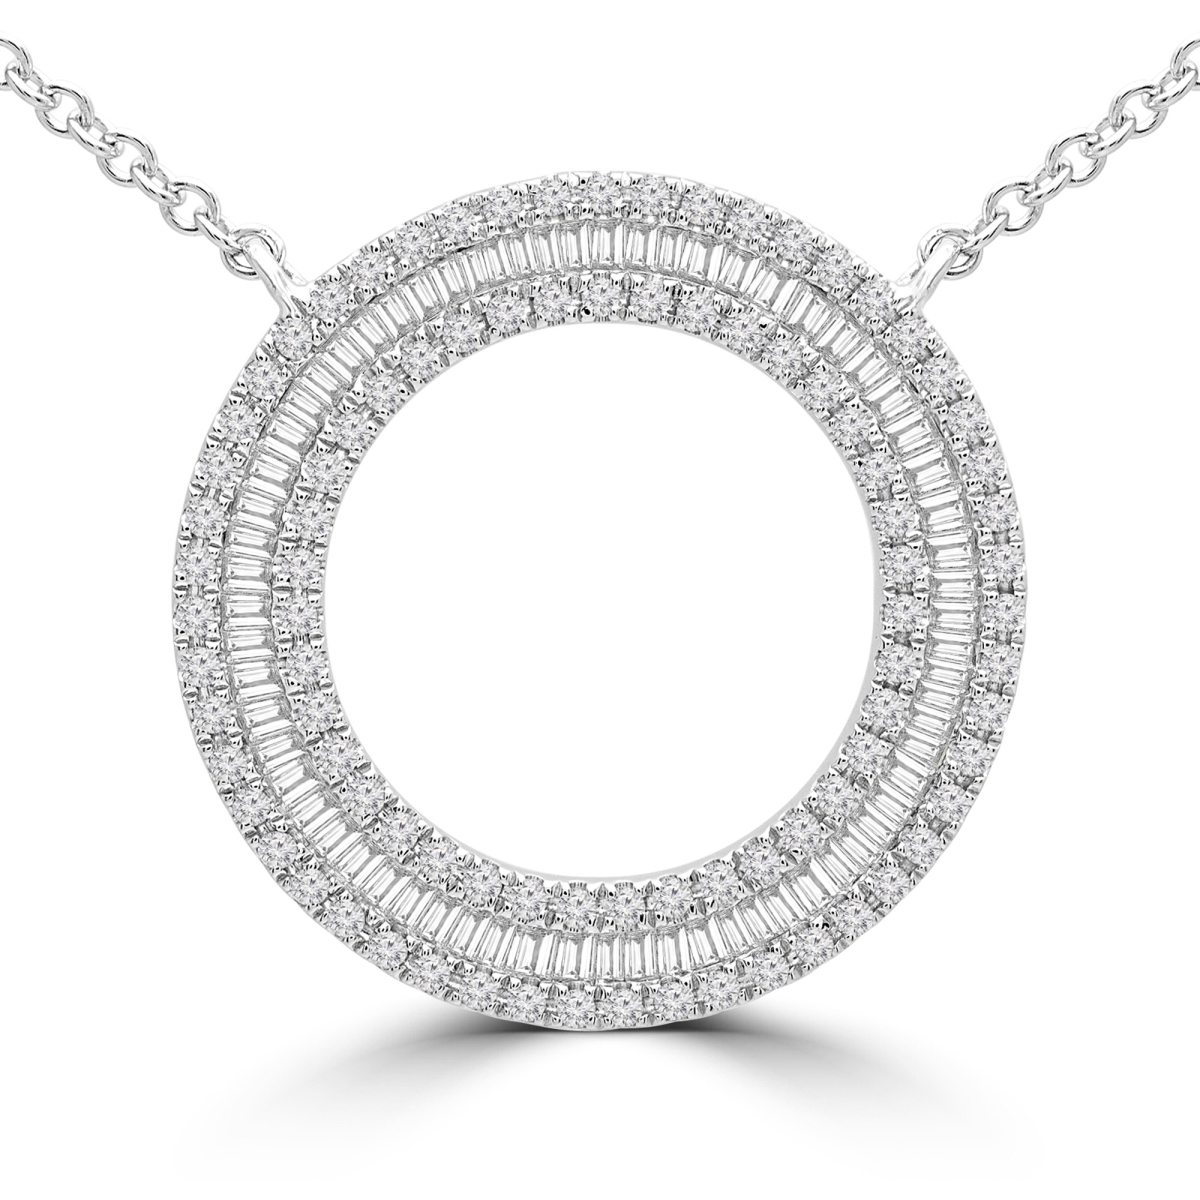 Picture of Majesty Diamonds MD190299 0.5 CTW Baguette Diamond Three-Row Circle Necklace in 18K White Gold